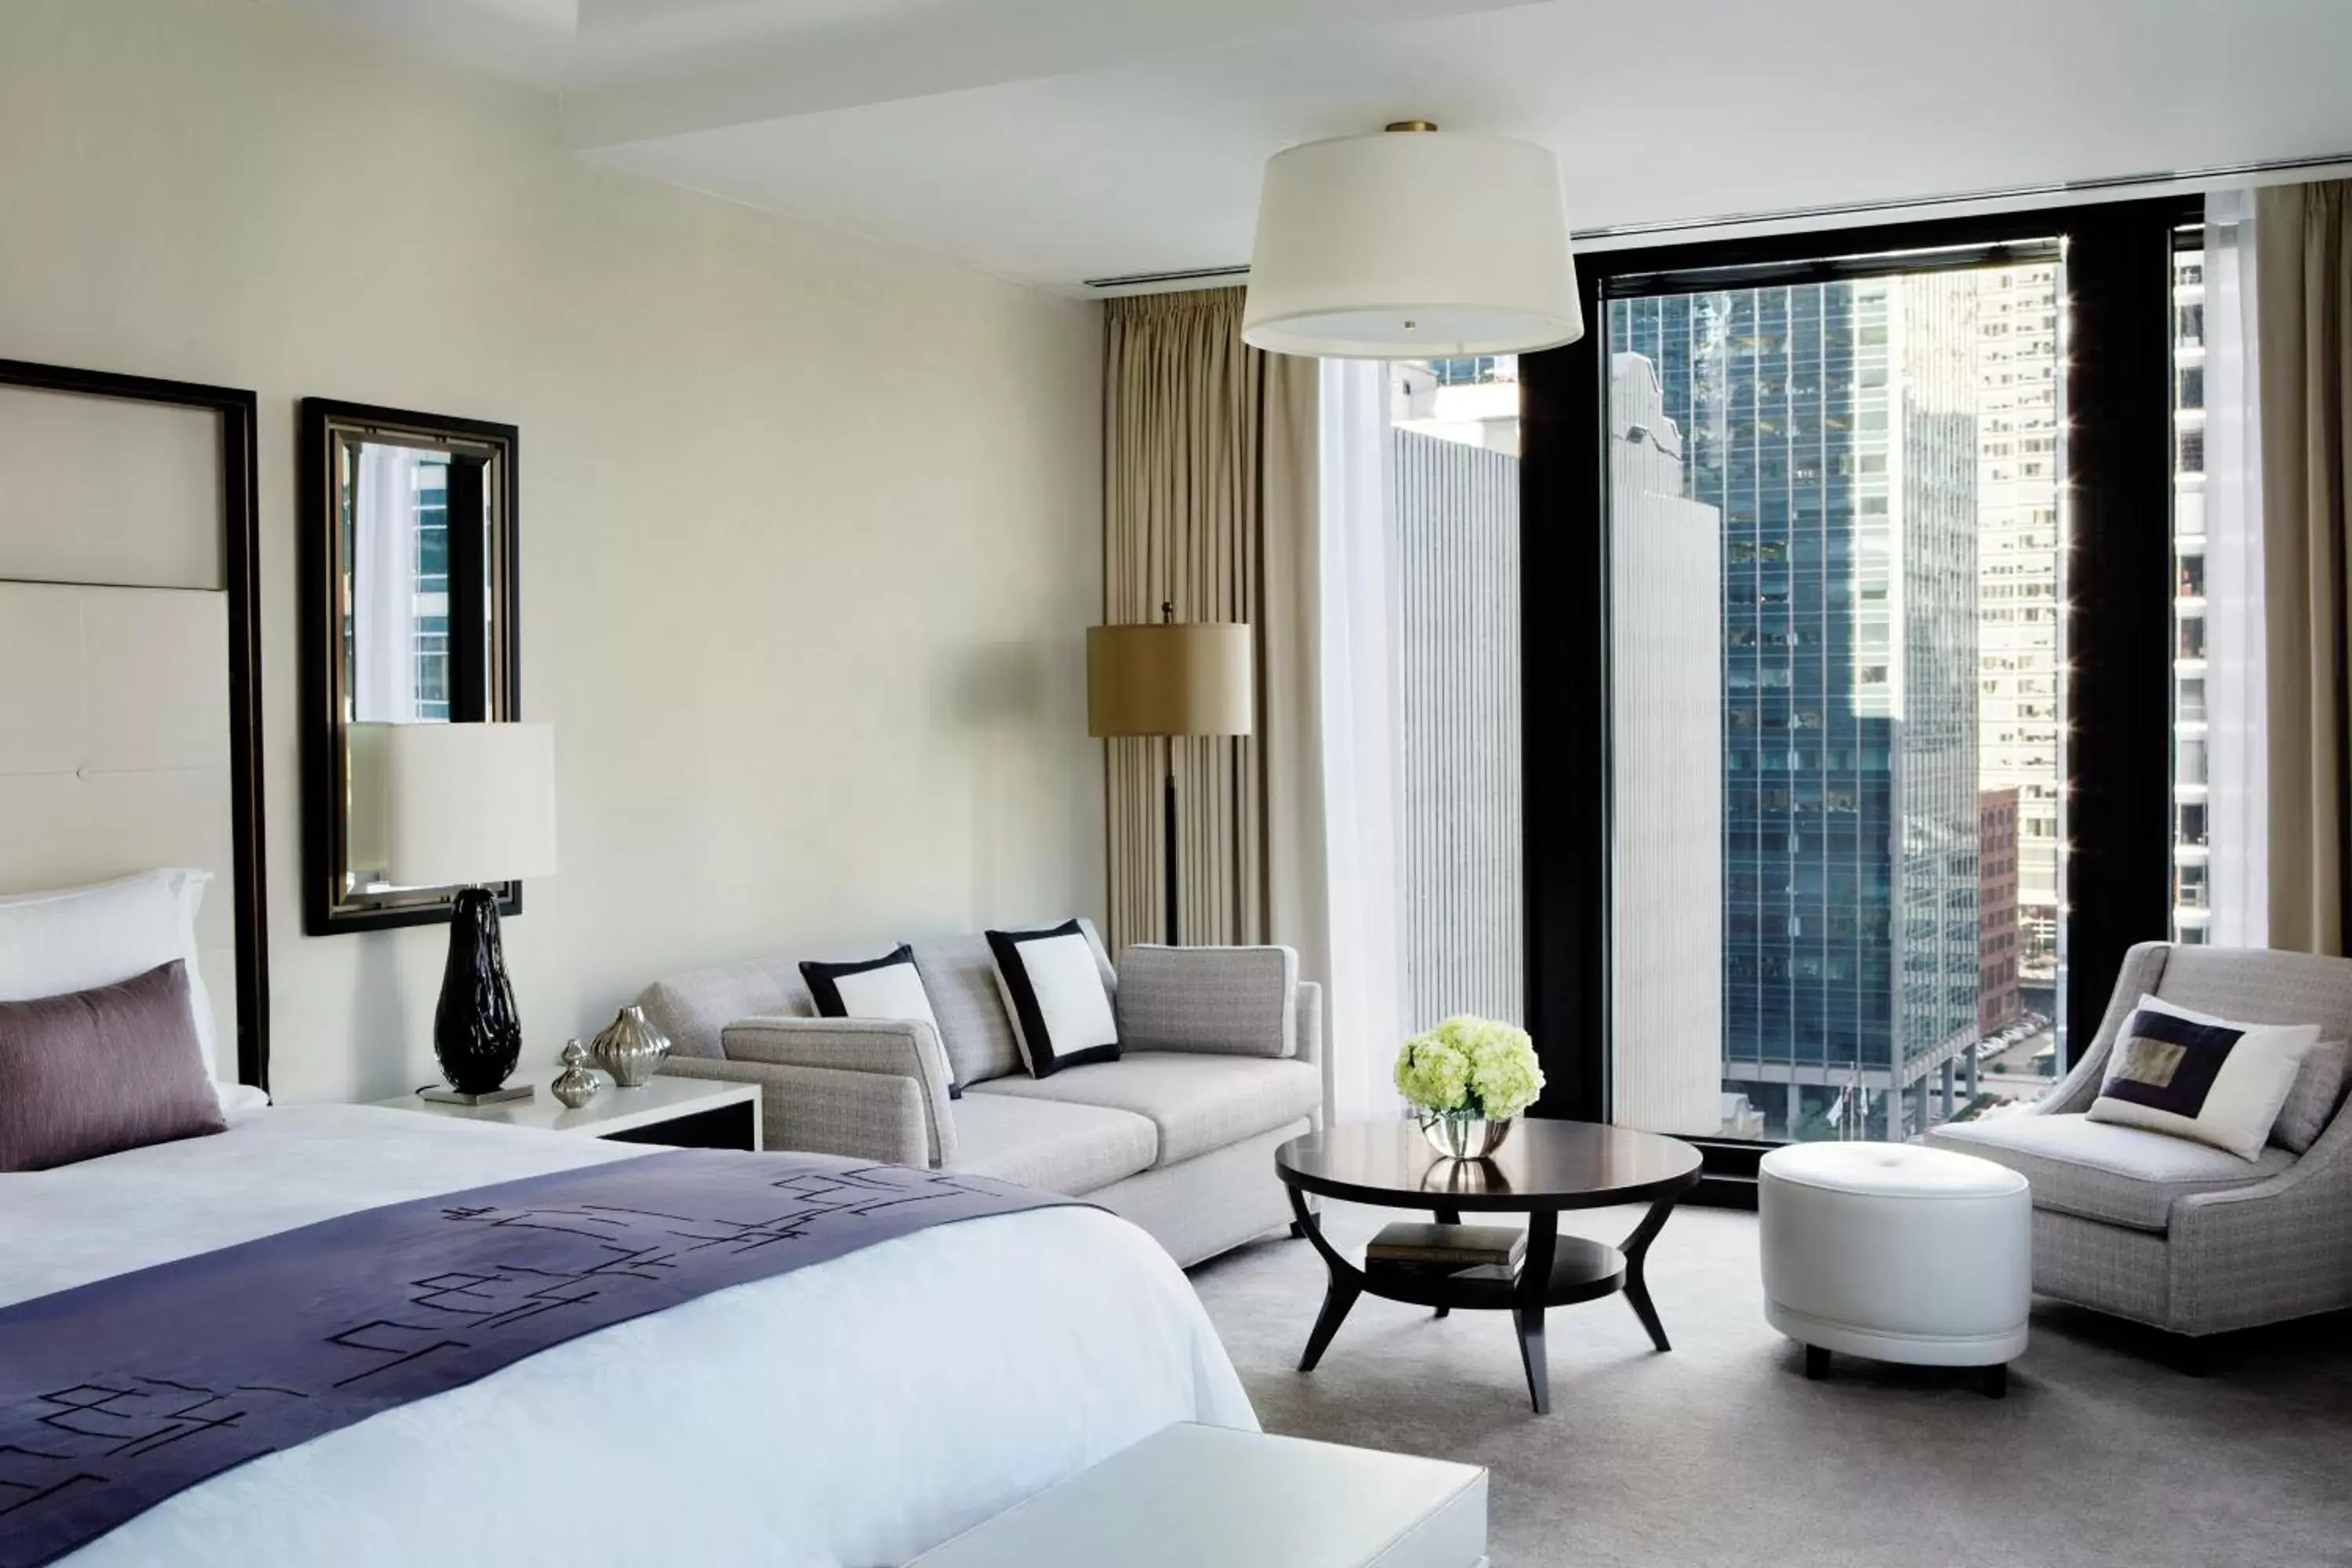 Living room, Room Photo in The Langham Chicago